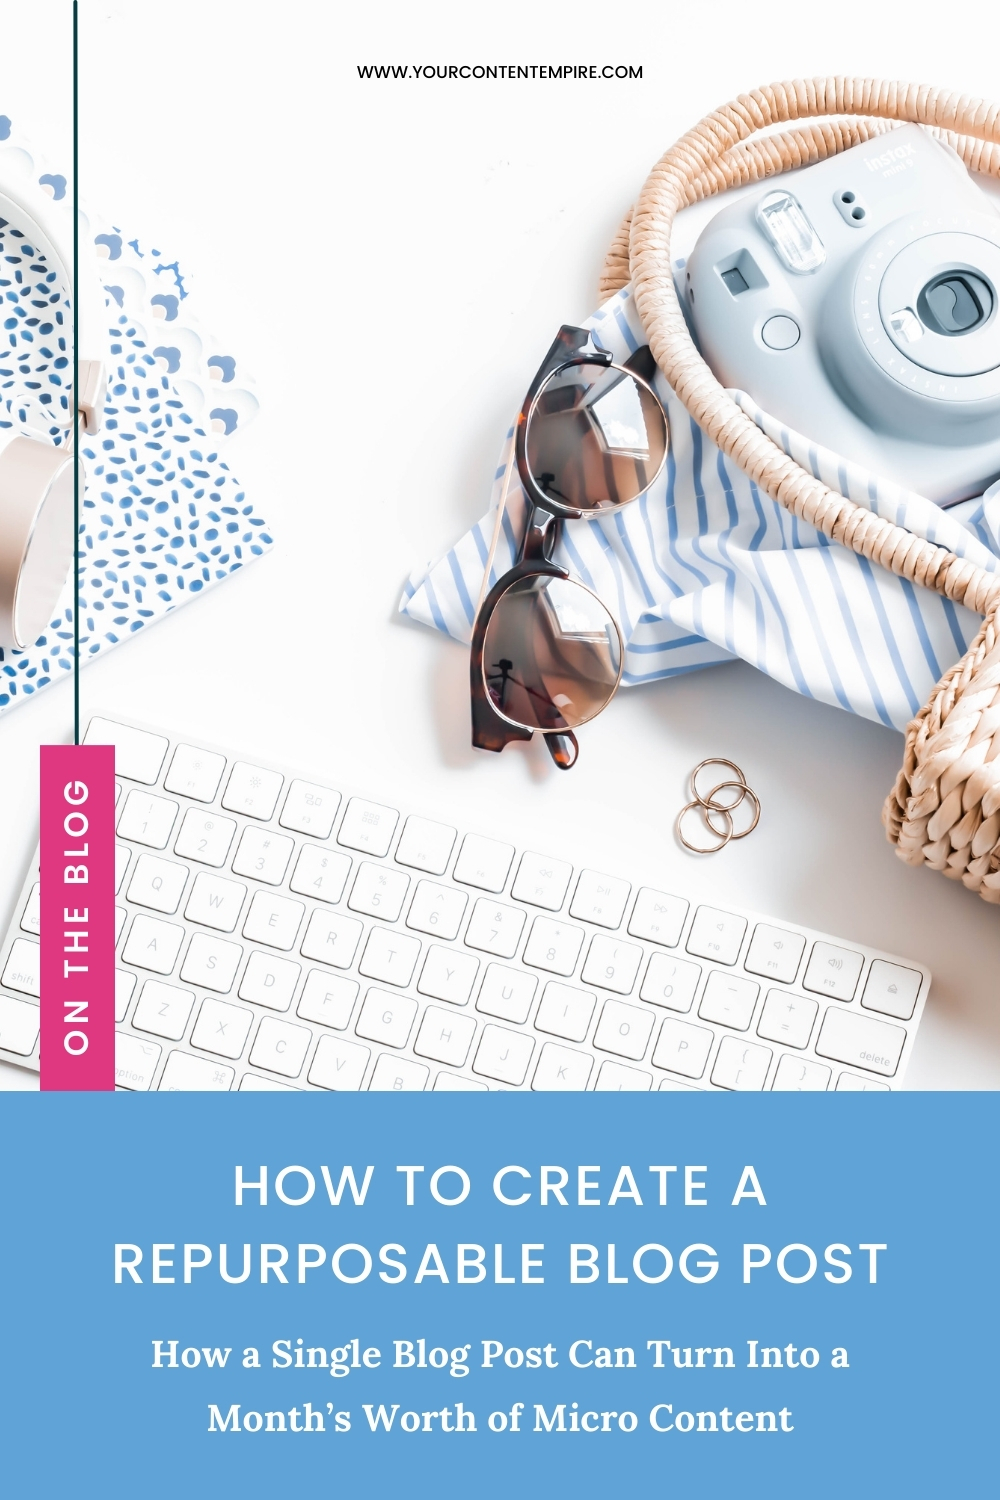 How to Create a Repurposable Blog Post